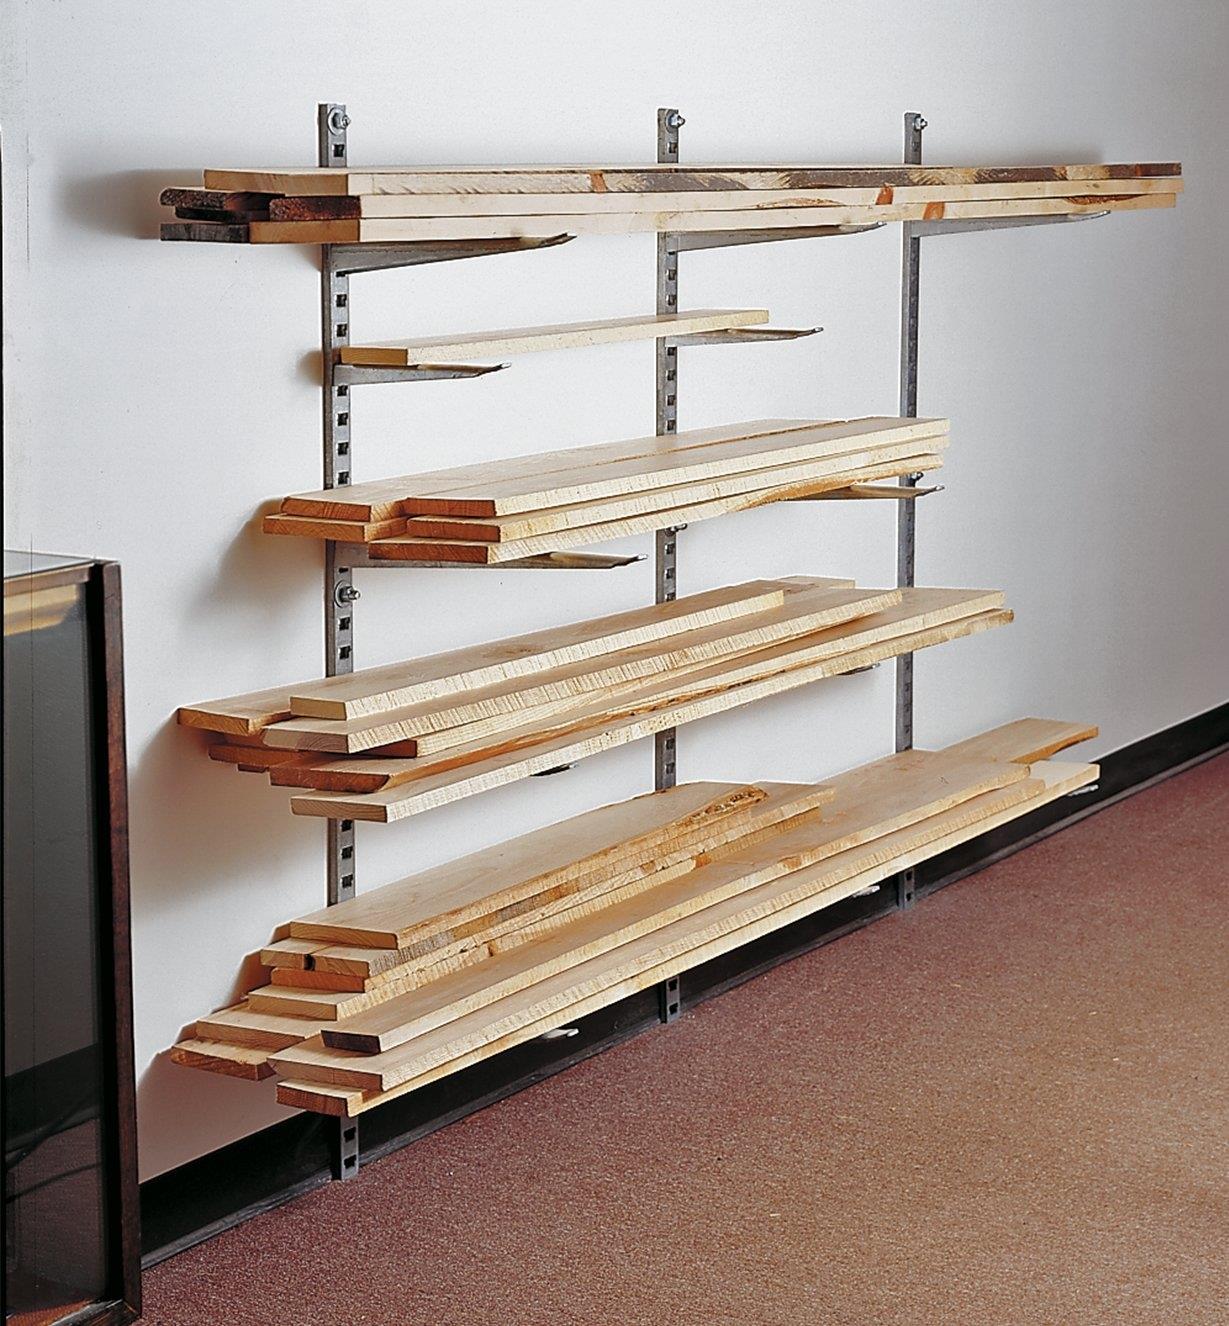 Lumber Storage System Lee Valley Tools, Rack Shelving Systems